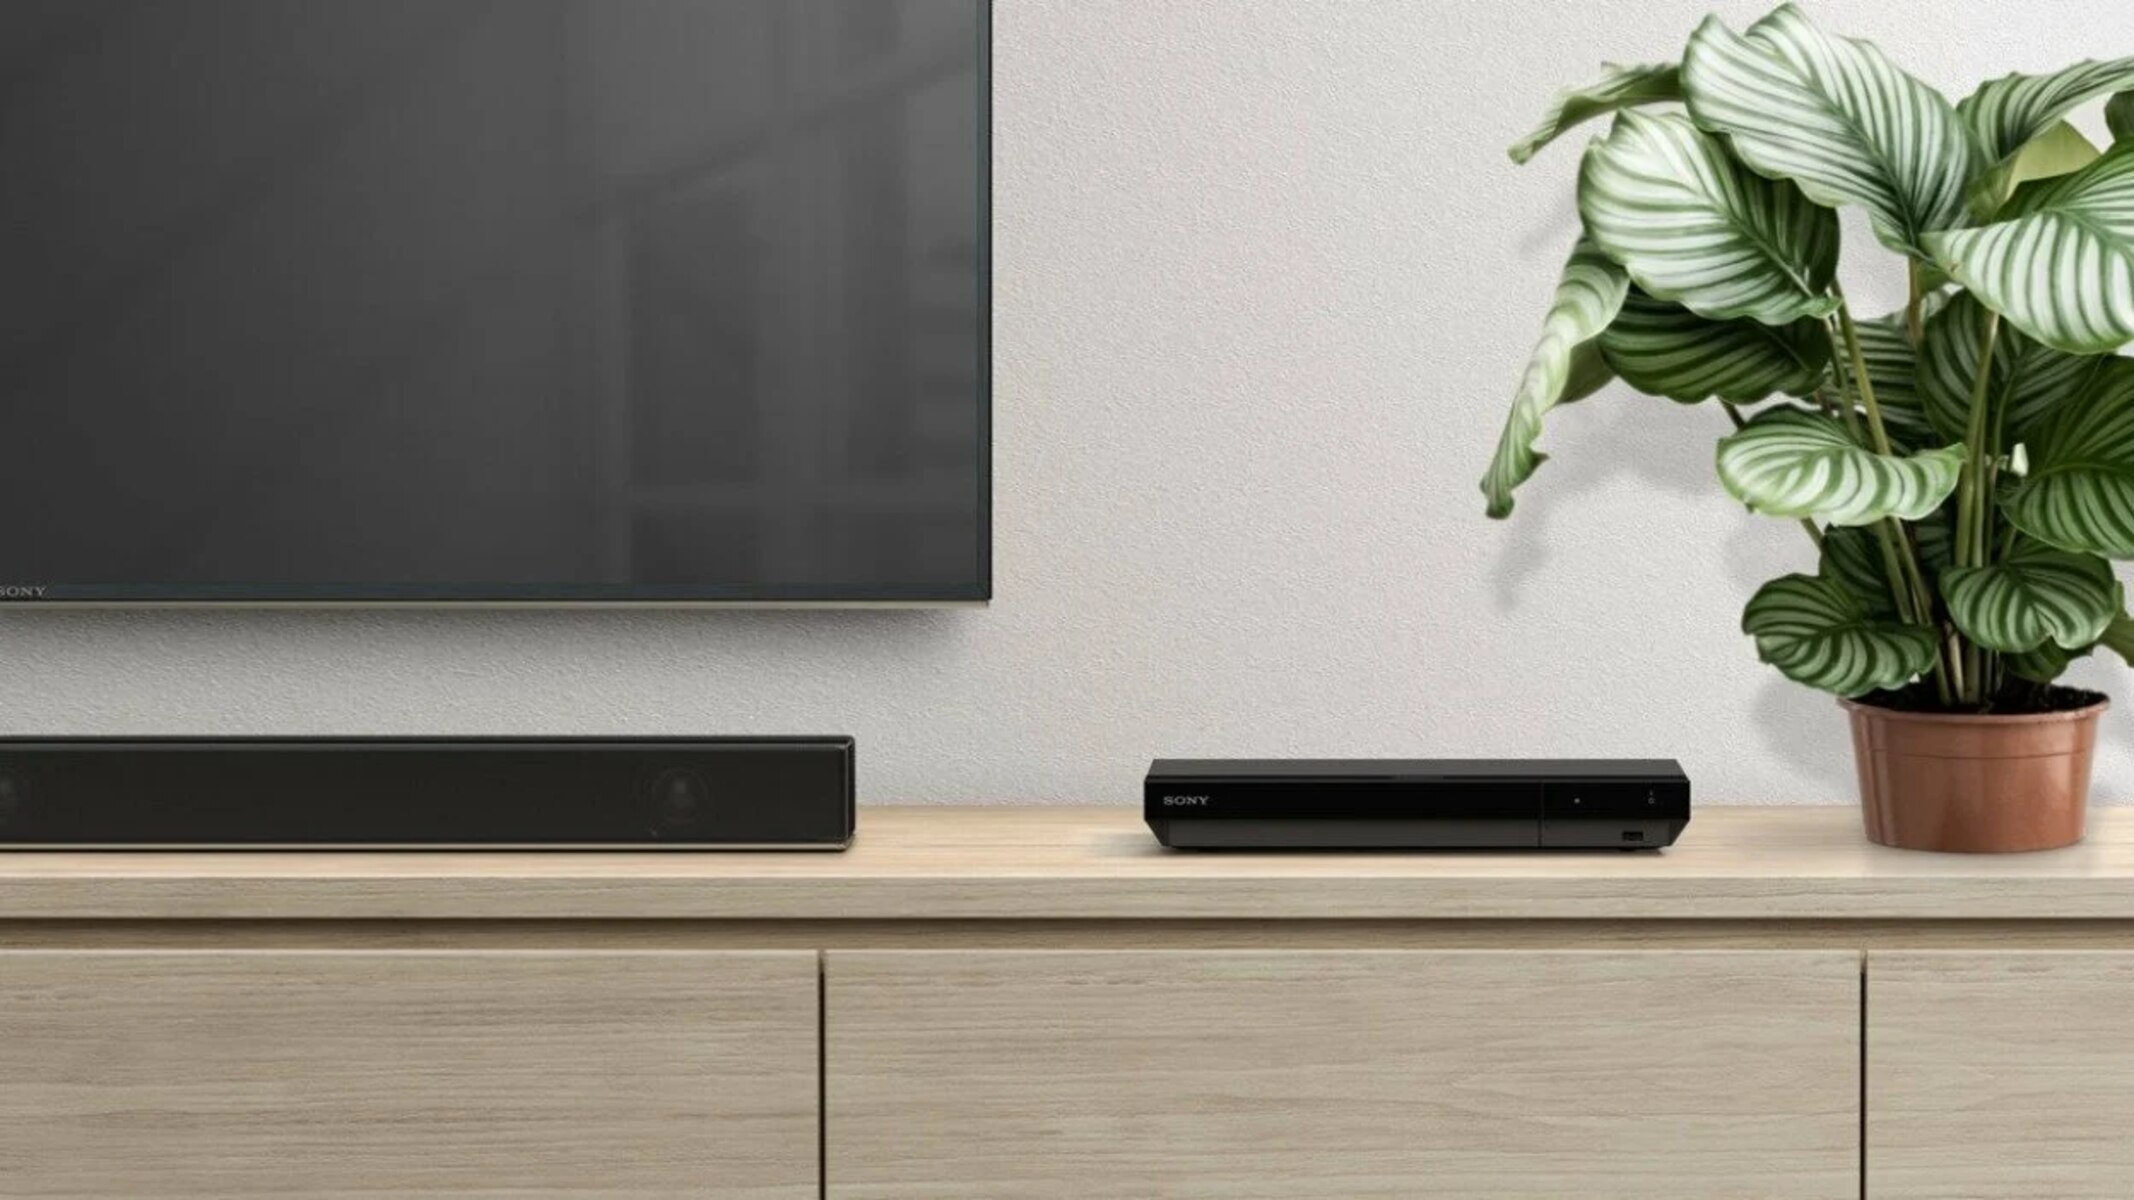 How To Connect Blu-ray Player To Soundbar